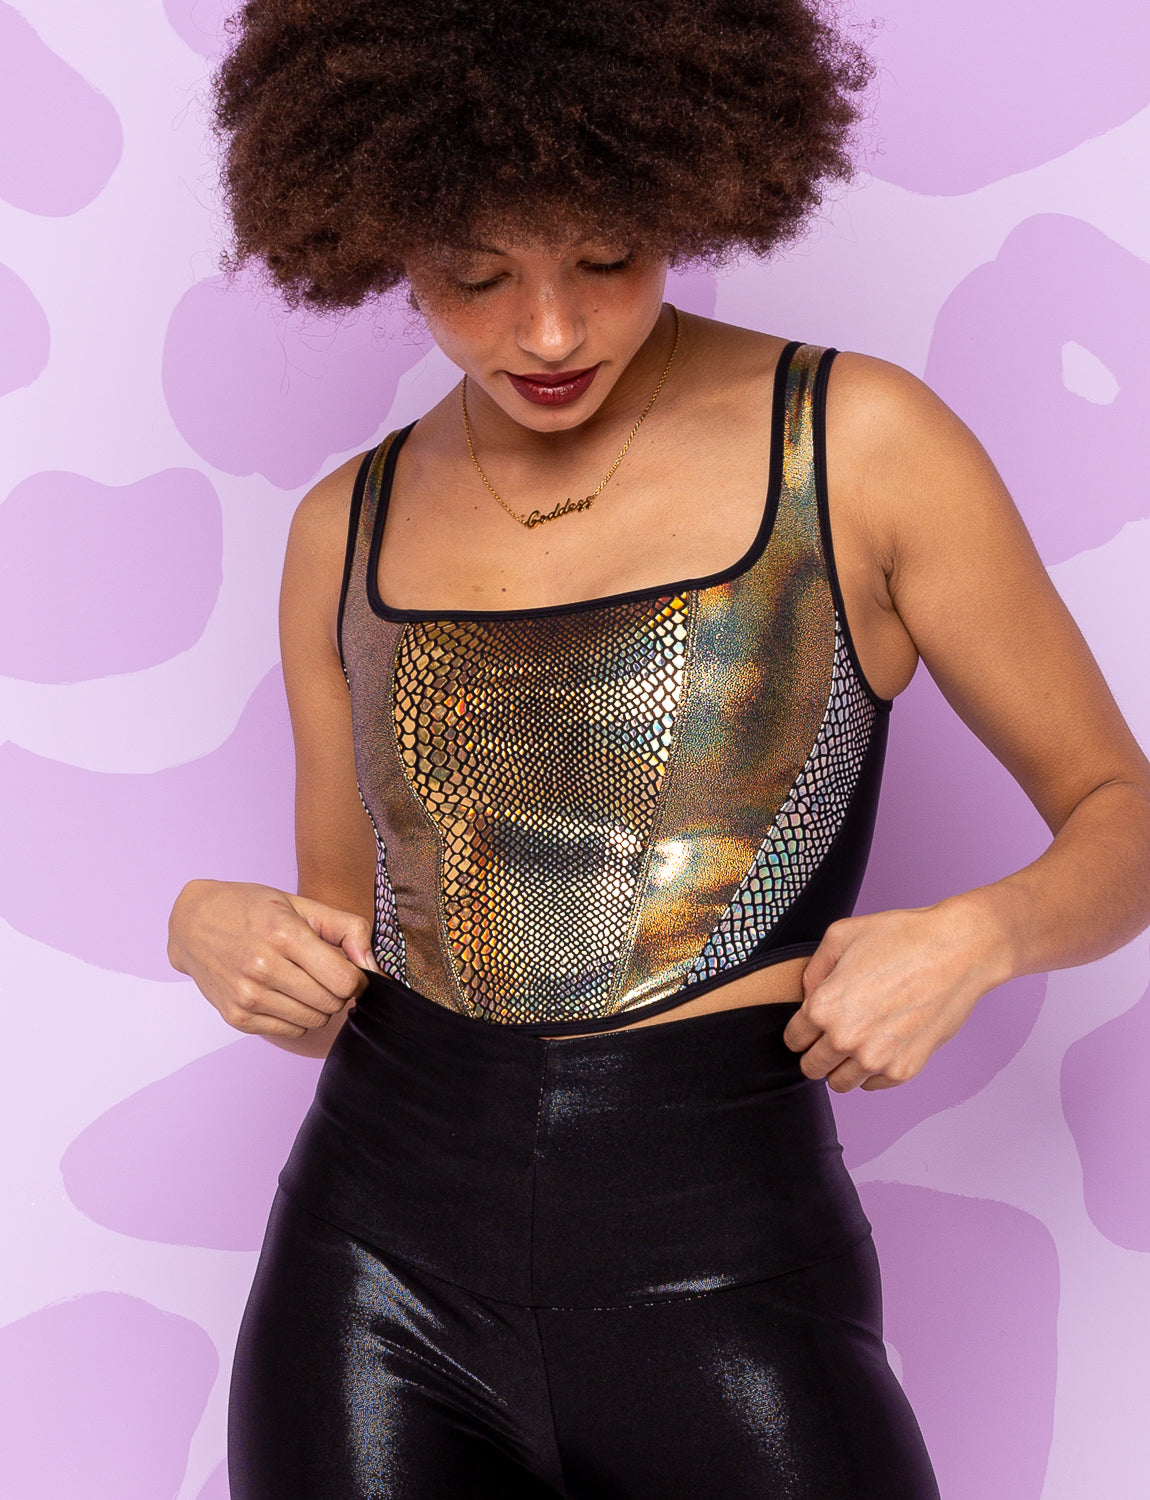 Lady modelling a Gold holographic snake print panelled bodice top